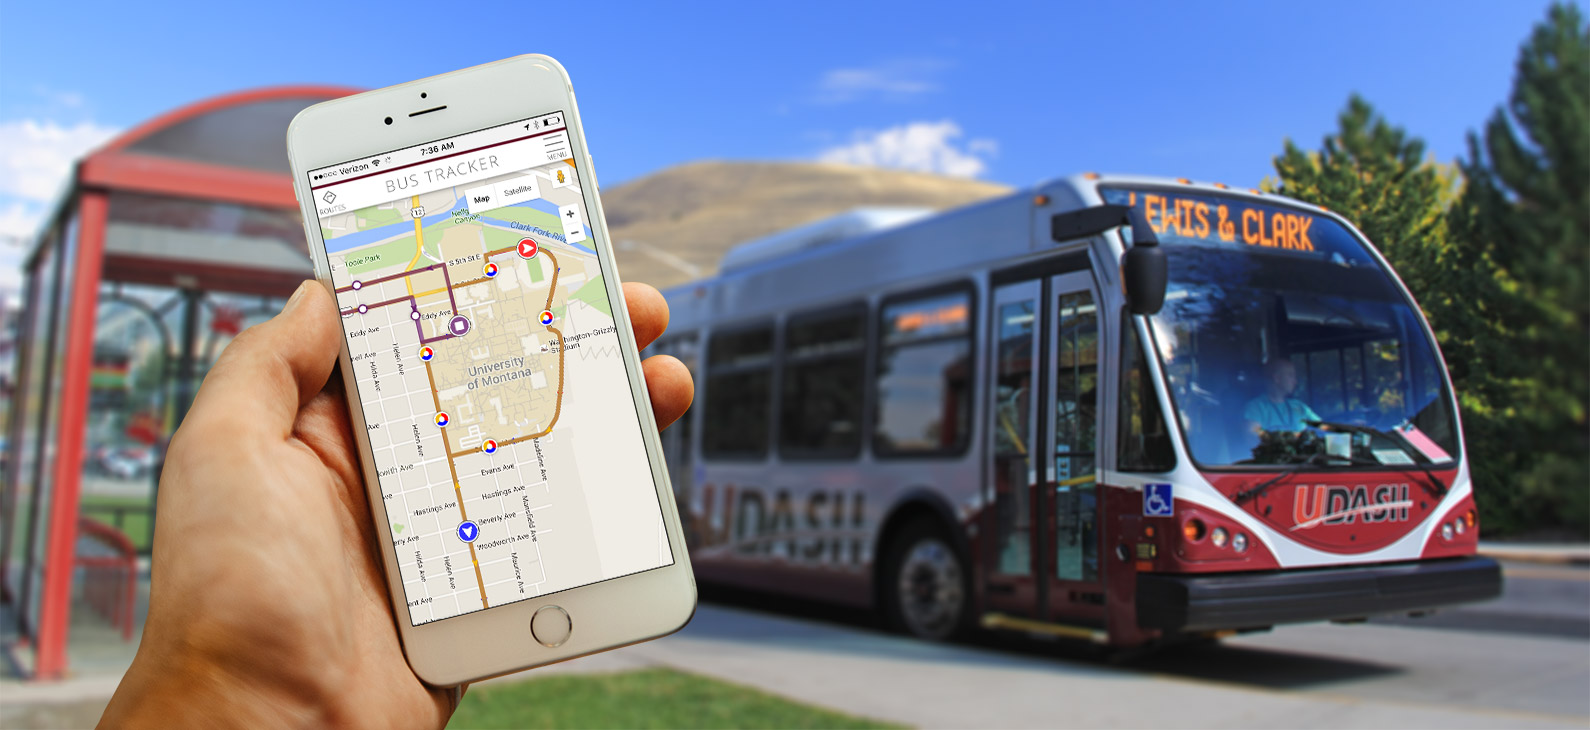 Udash bus and bus tracker on smart phone